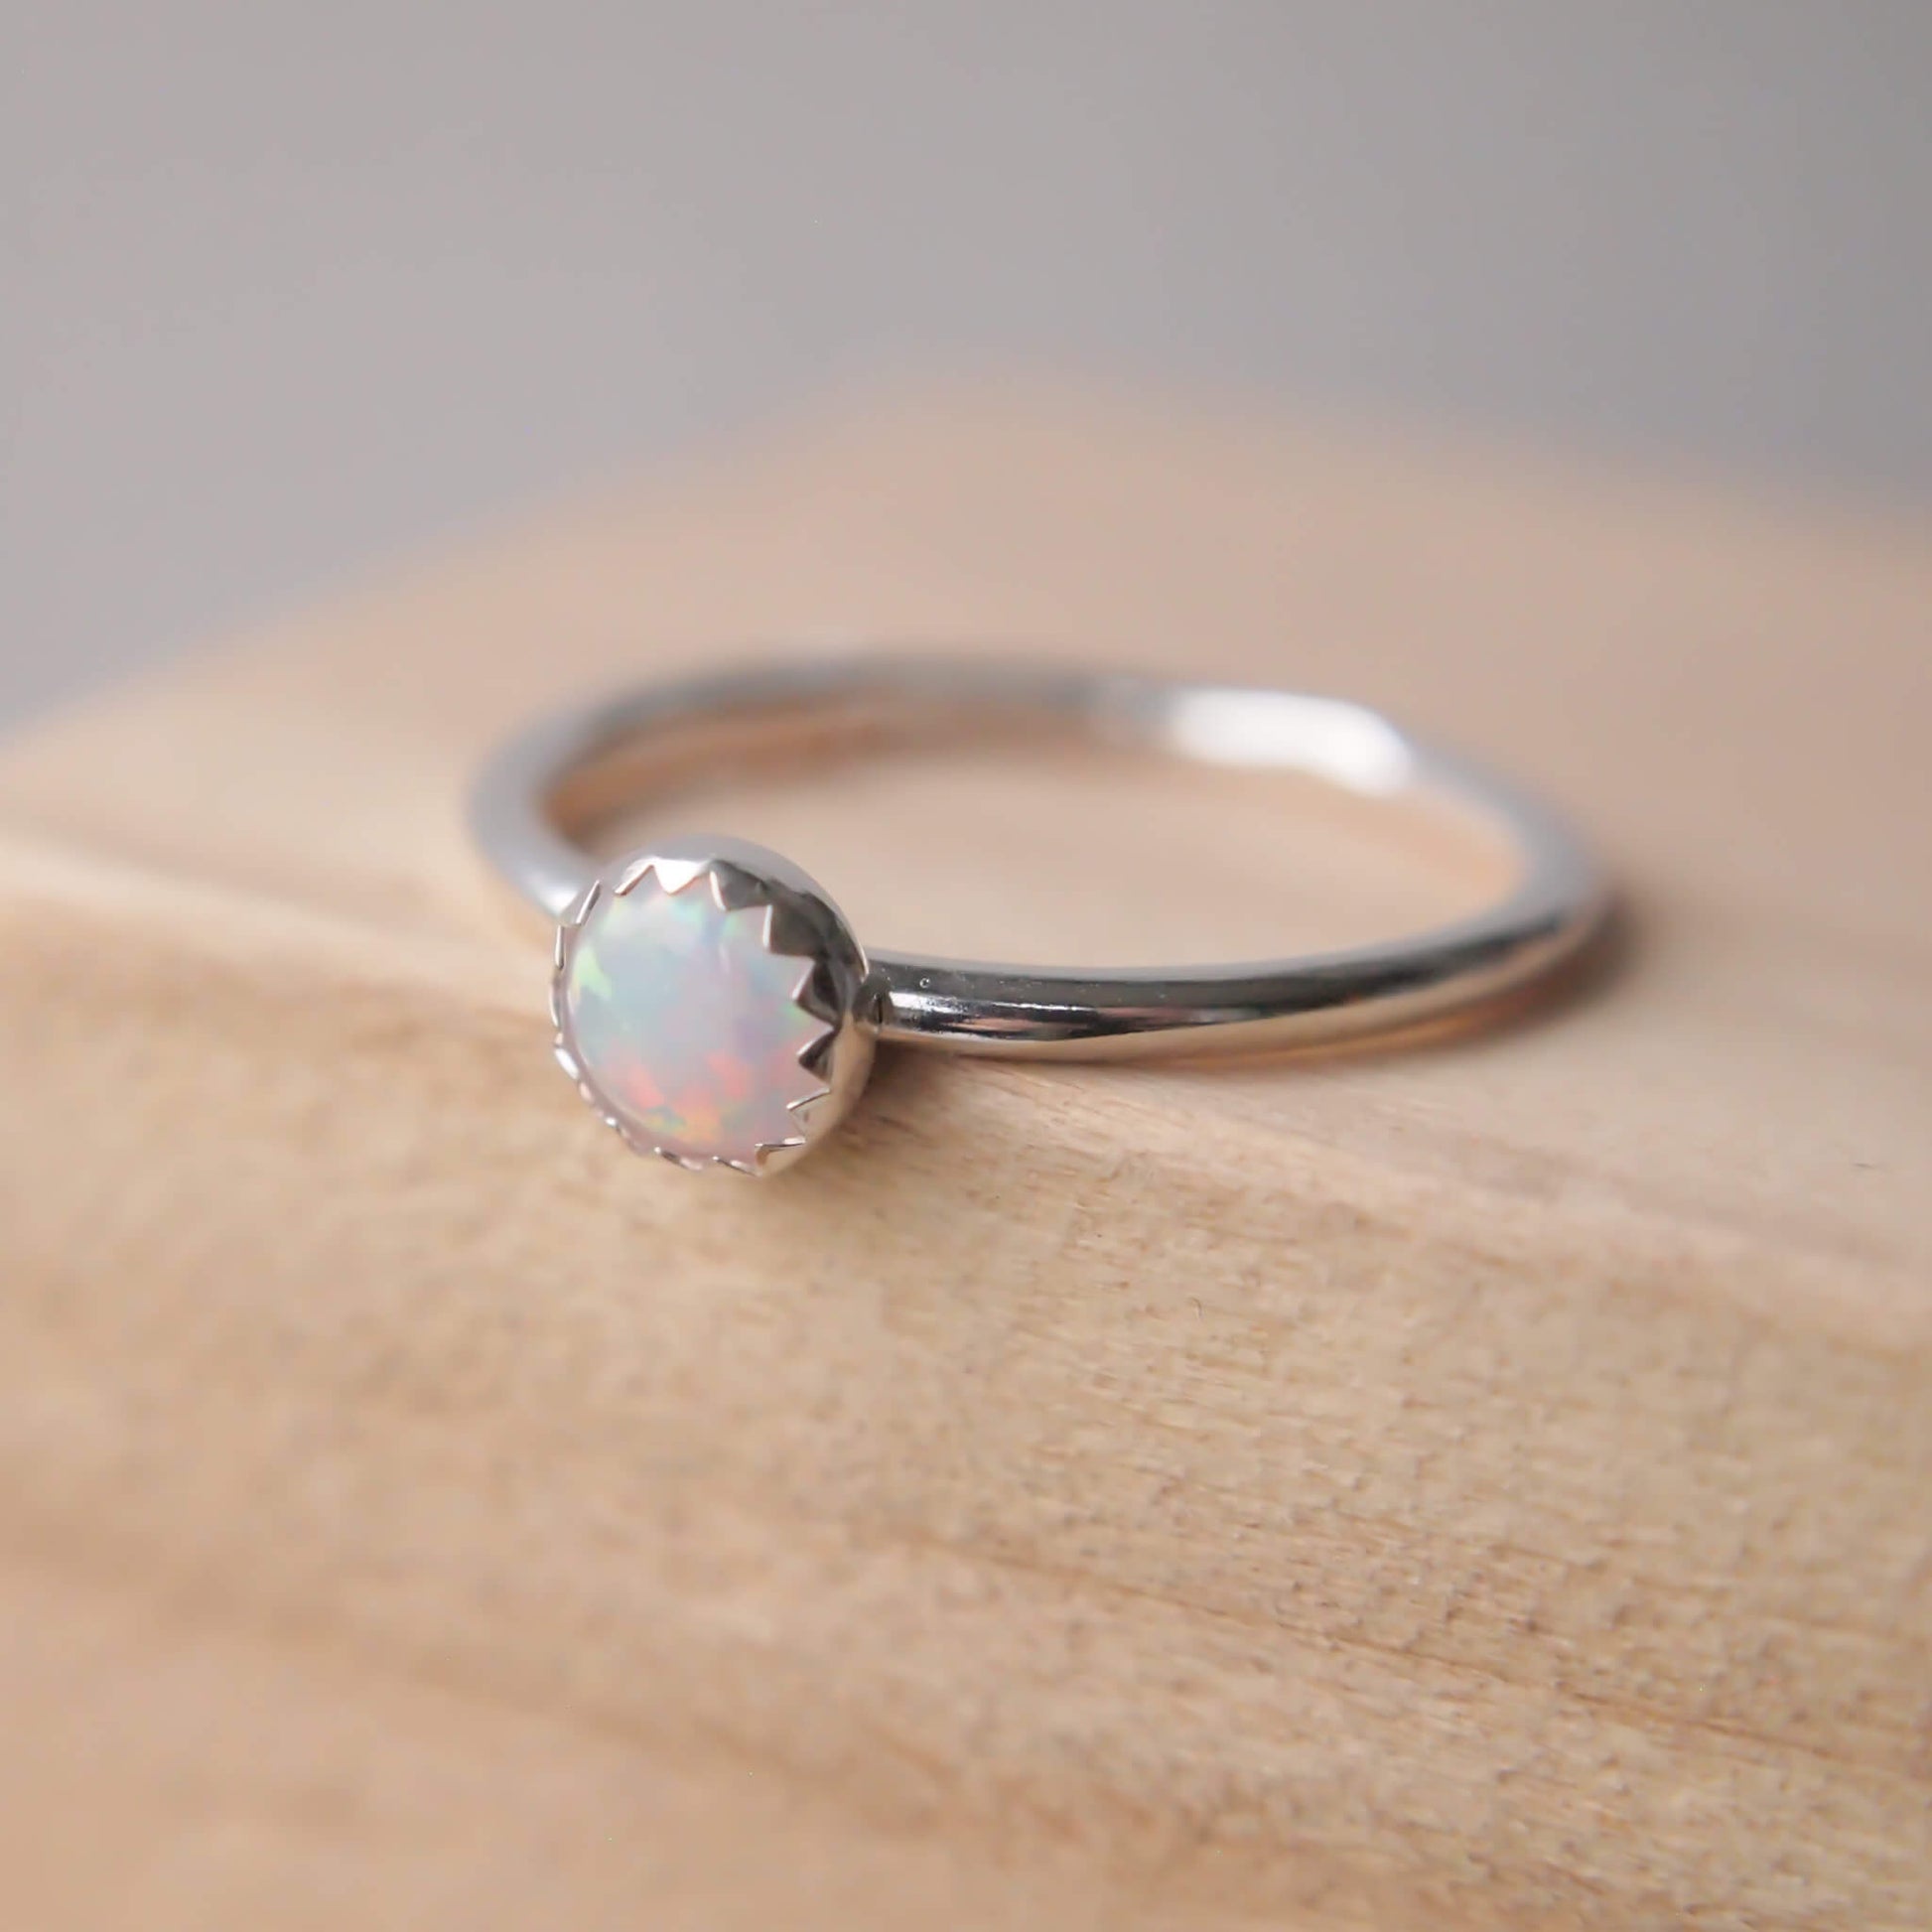 Lab Opal white gemstone and Silver RIng. THe stone is an imitation Opal, round and 5mm in size set onto a simple silver band with a zig zag edge where the silver meets the gem. Handmade by maram jewellery in Edinburgh